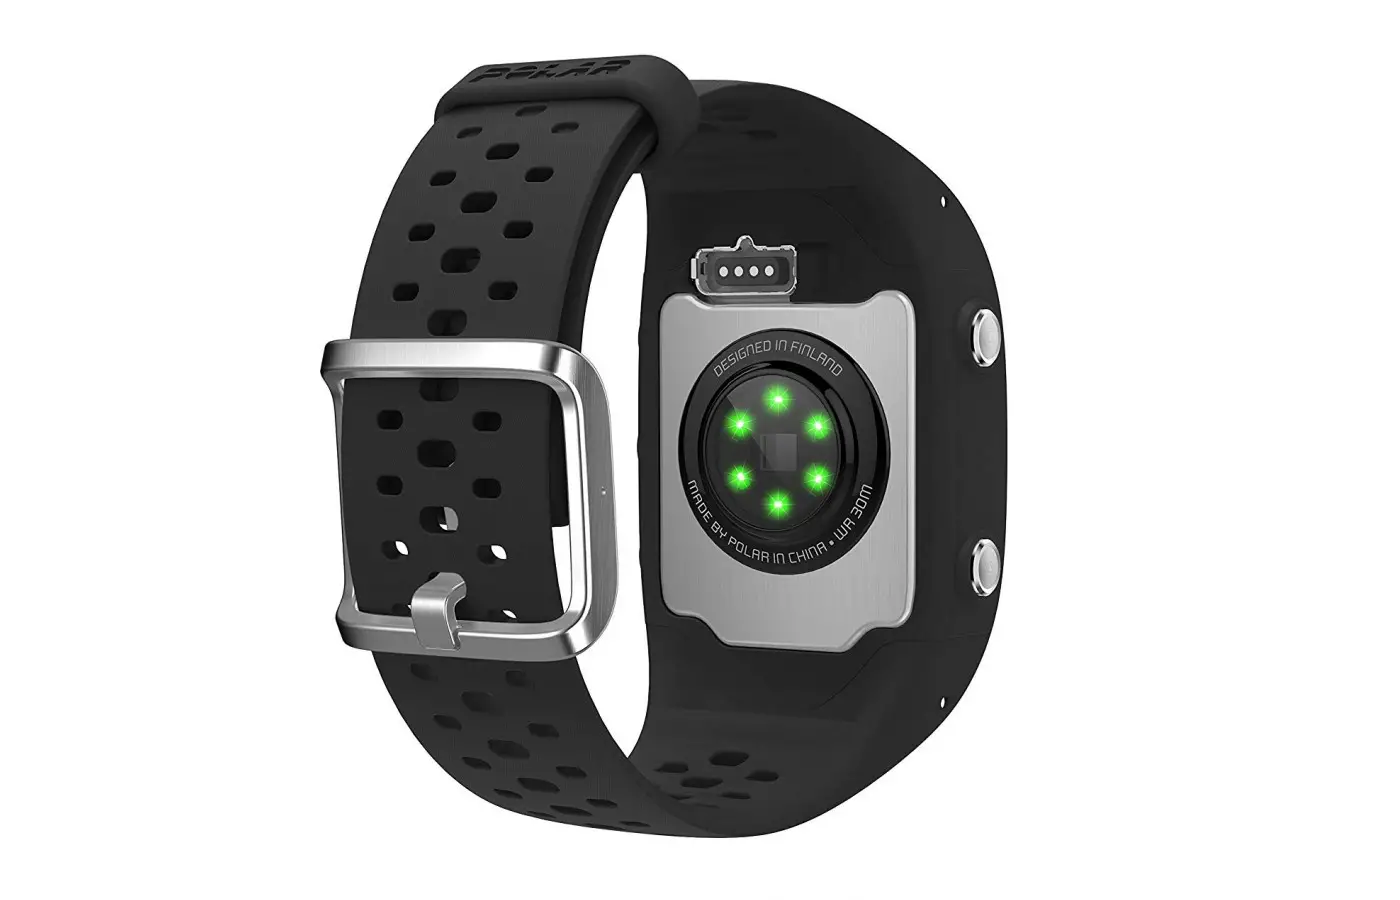 The built-in 6 LED optical sensors and proprietary heart rate algorithm deliver sophisticated heart rate data.